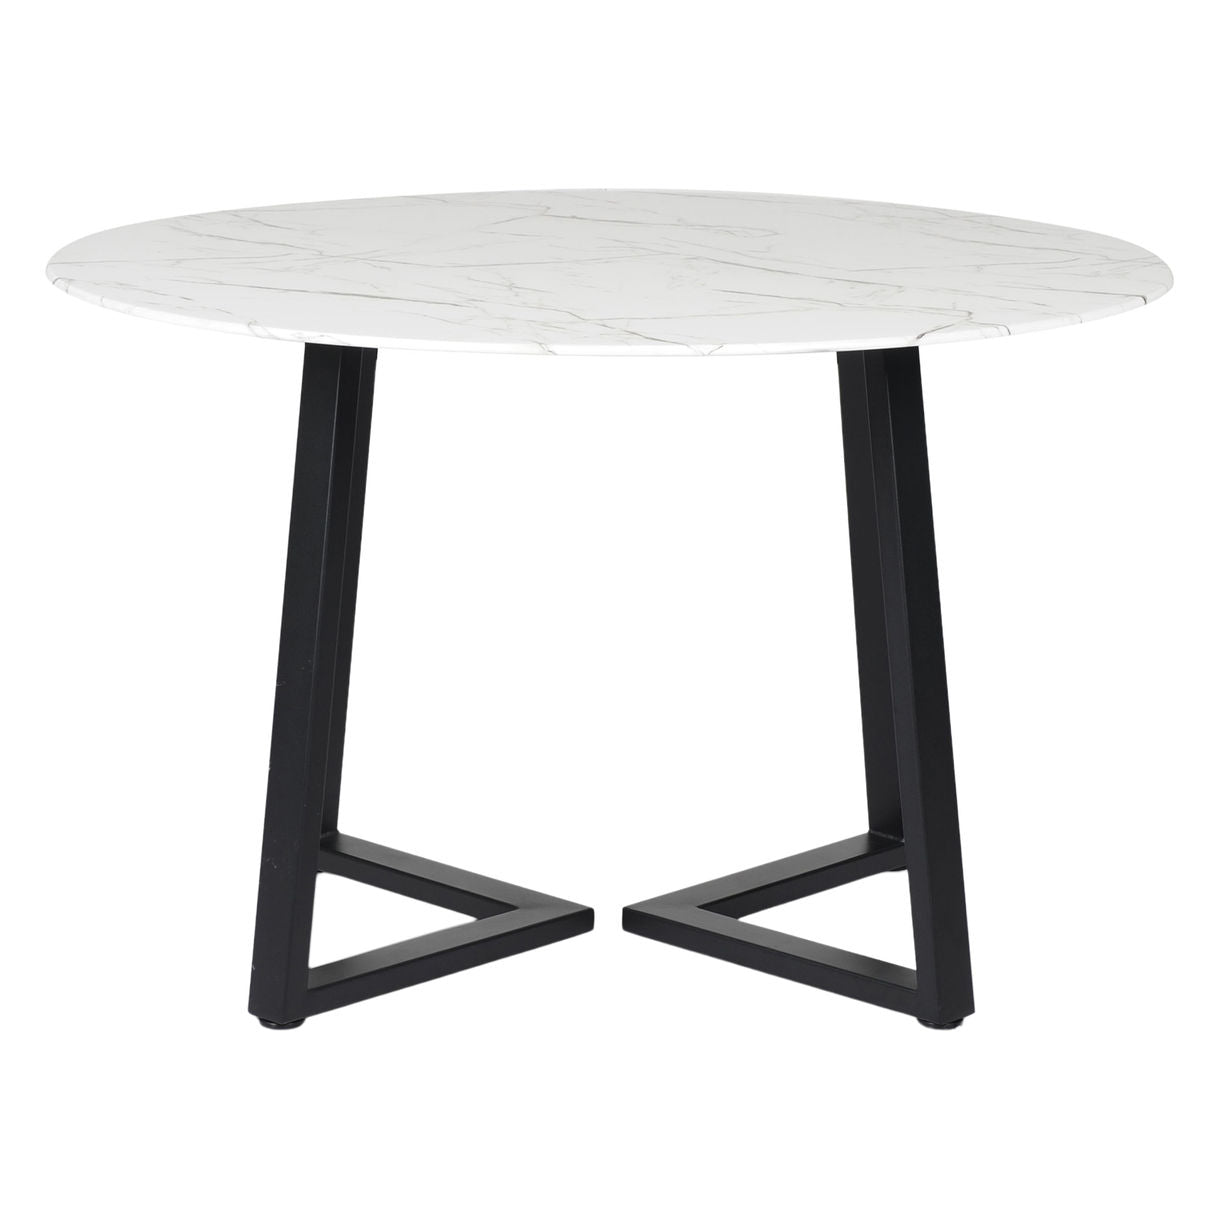 Fugura Round 6 Seater Marble Dining Table In Black Finish